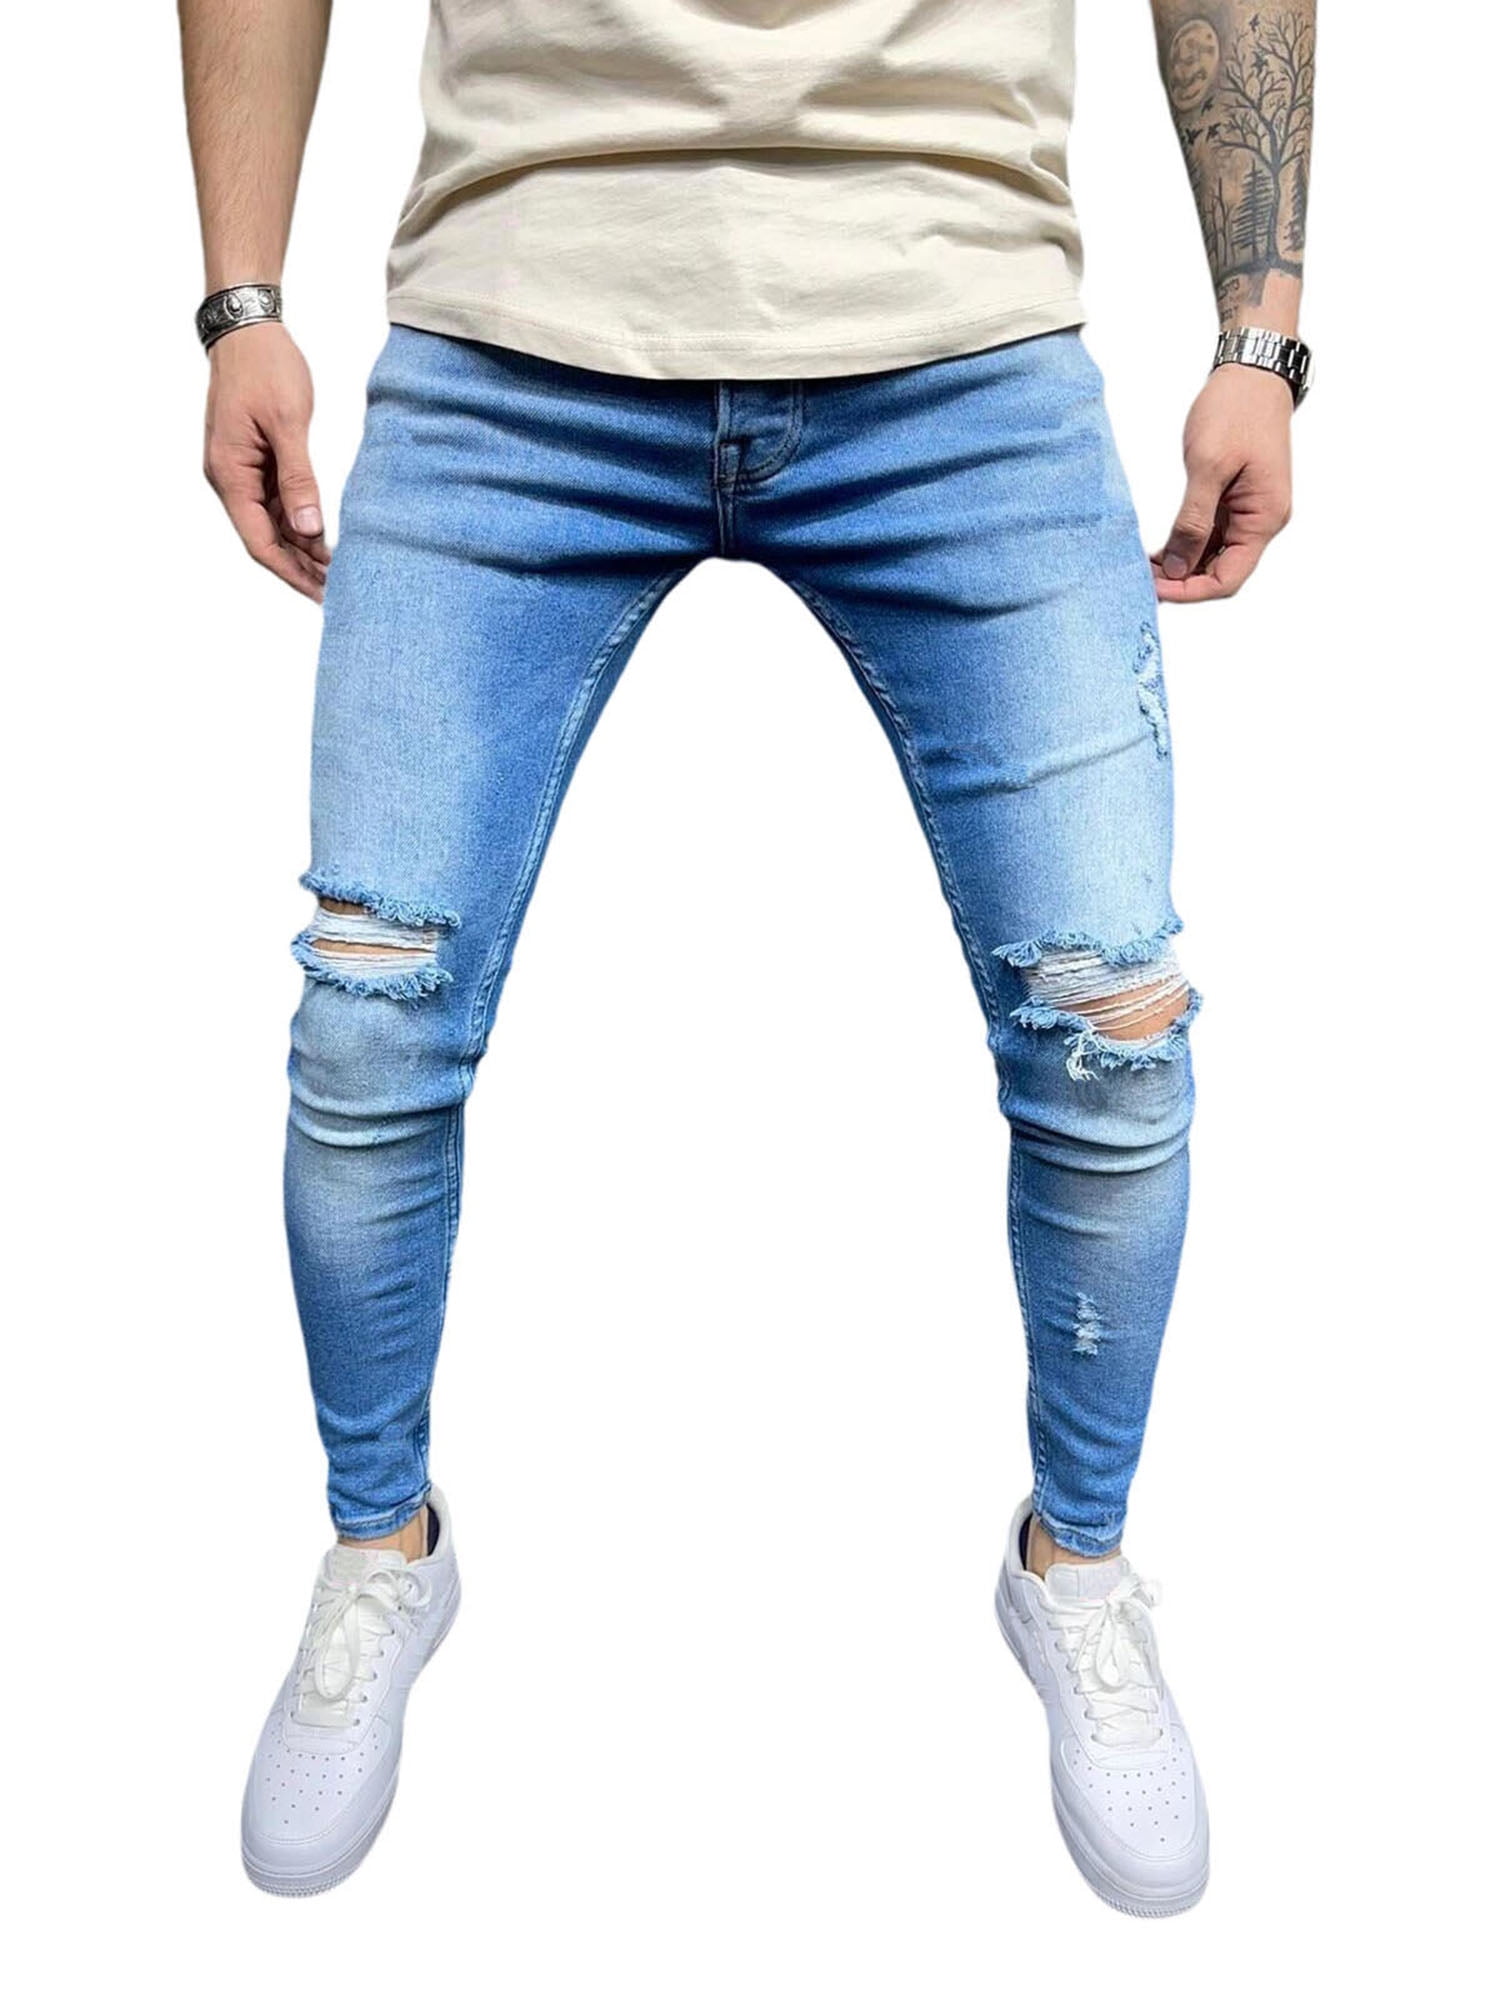 ripped jeans for fat guys - OFF-61% >Free Delivery